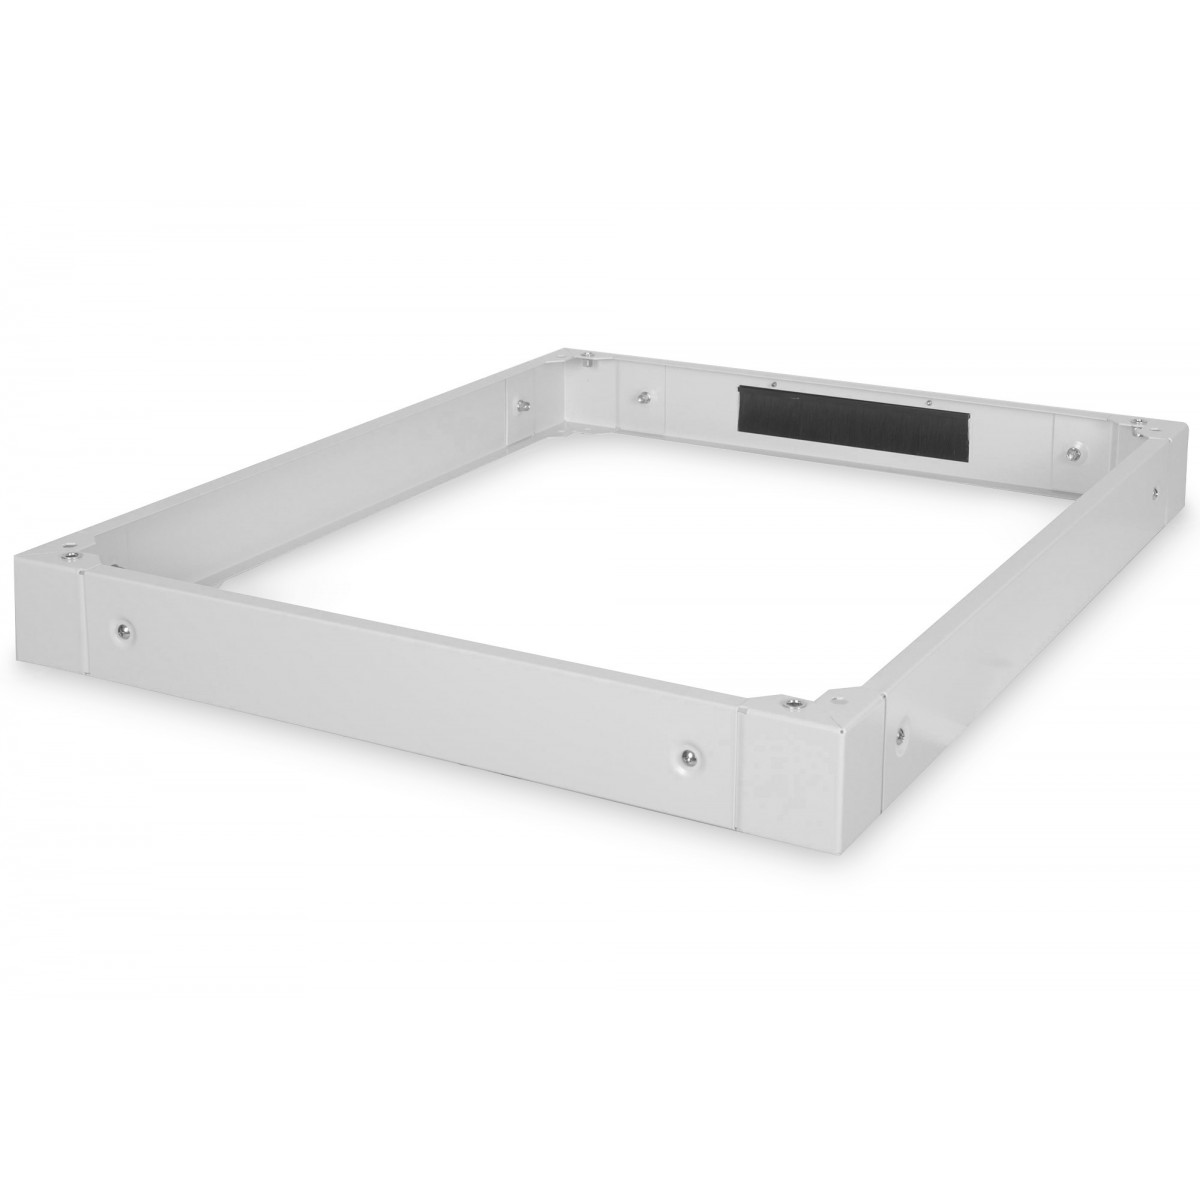 DIGITUS Plinth for Server Cabinets of the Unique Series - 800x1000 mm (WxD)